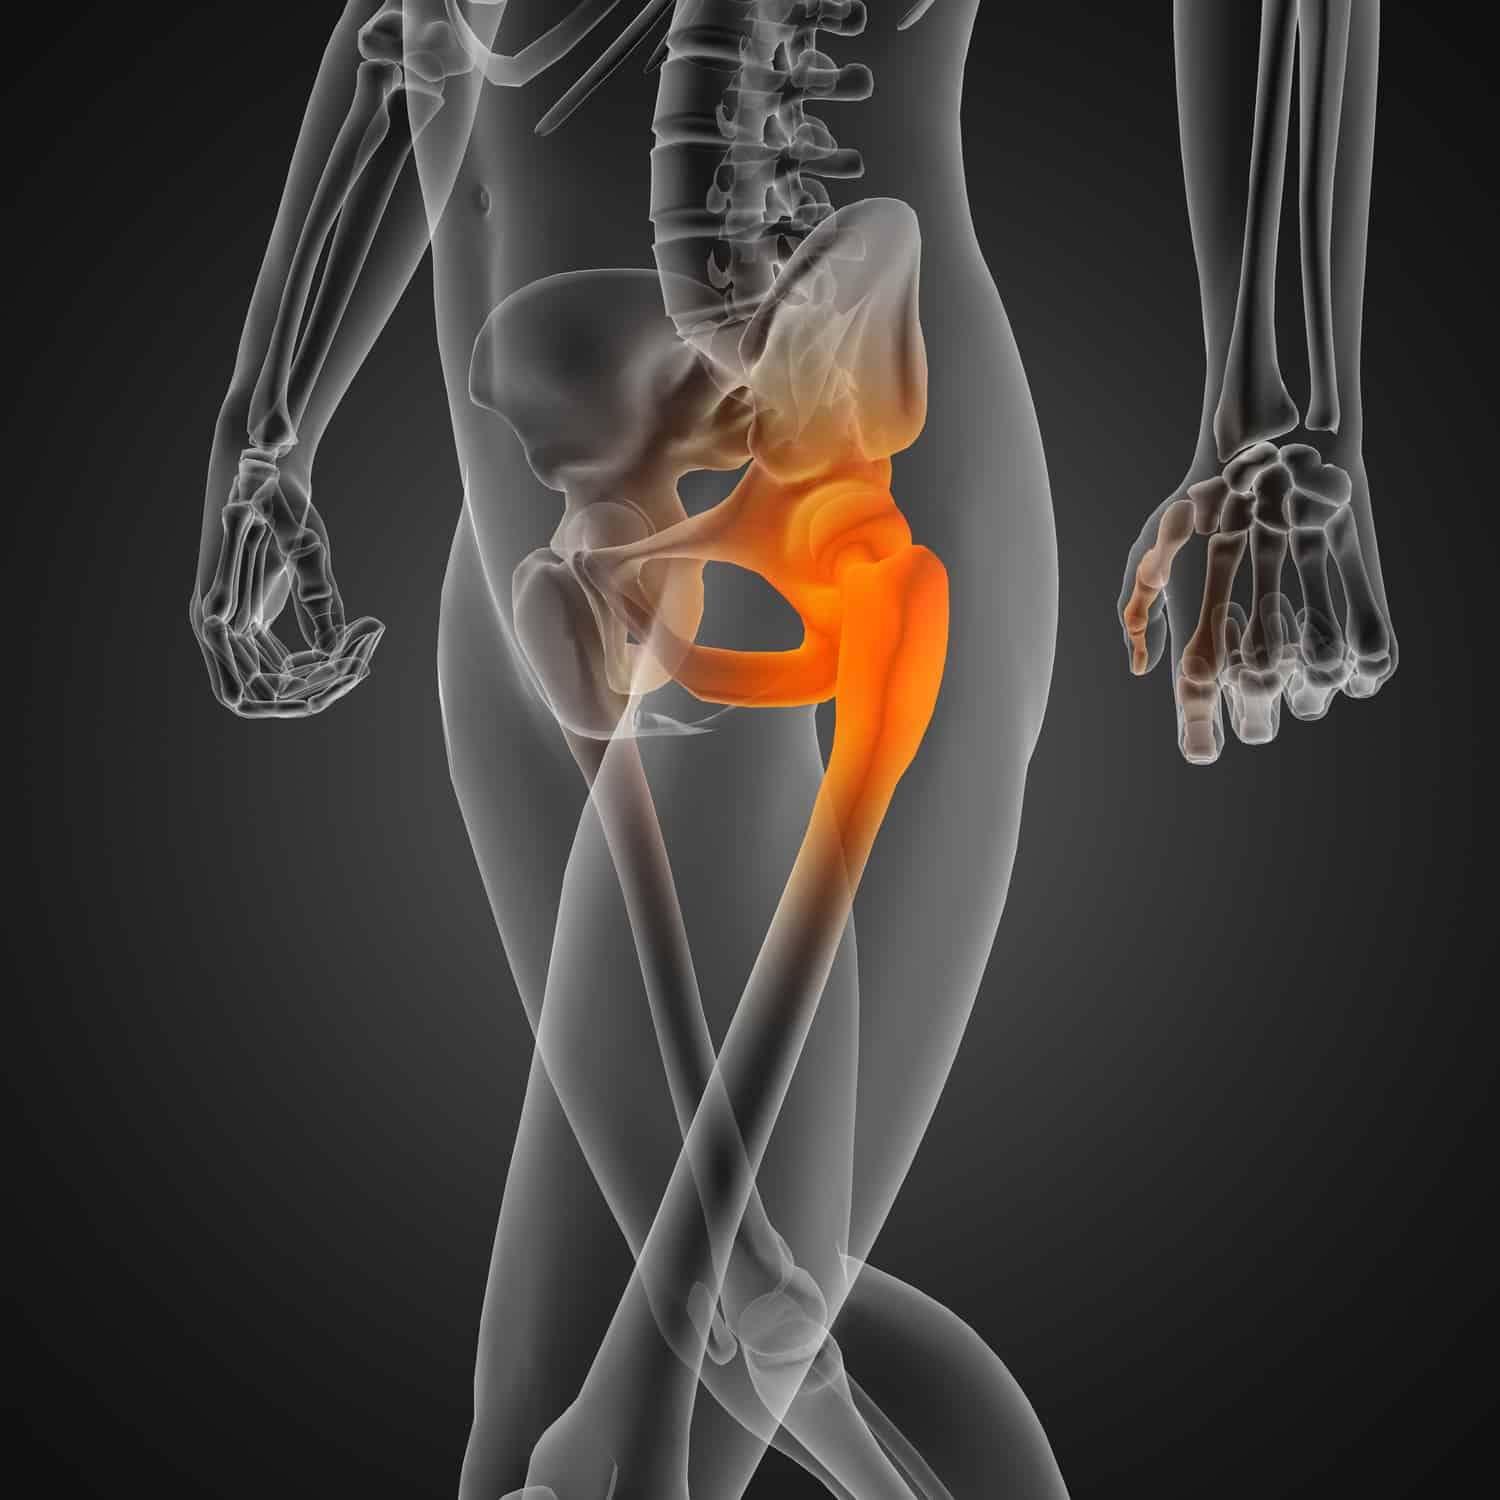 How Do I Know if My Hip Pain Is Serious?